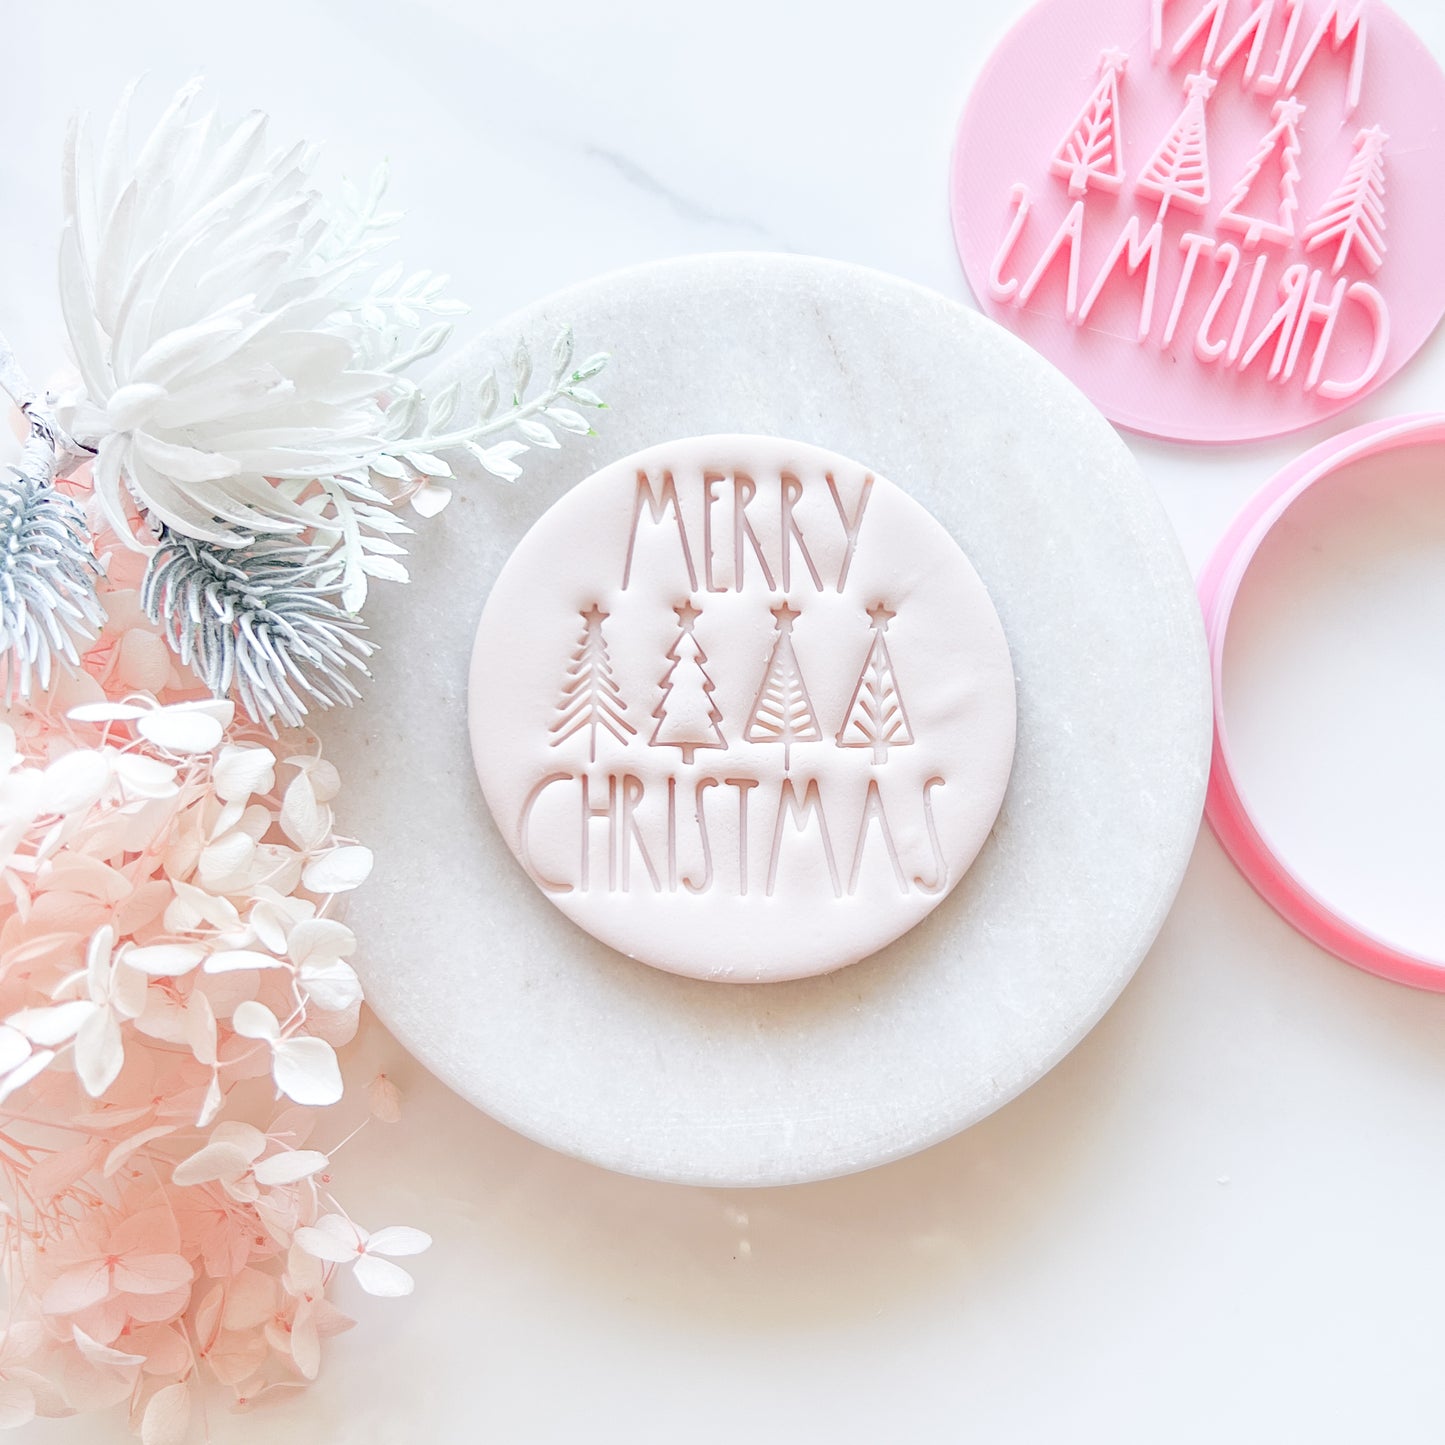 "Merry Christmas #1" Cookie Cutter & Stamp